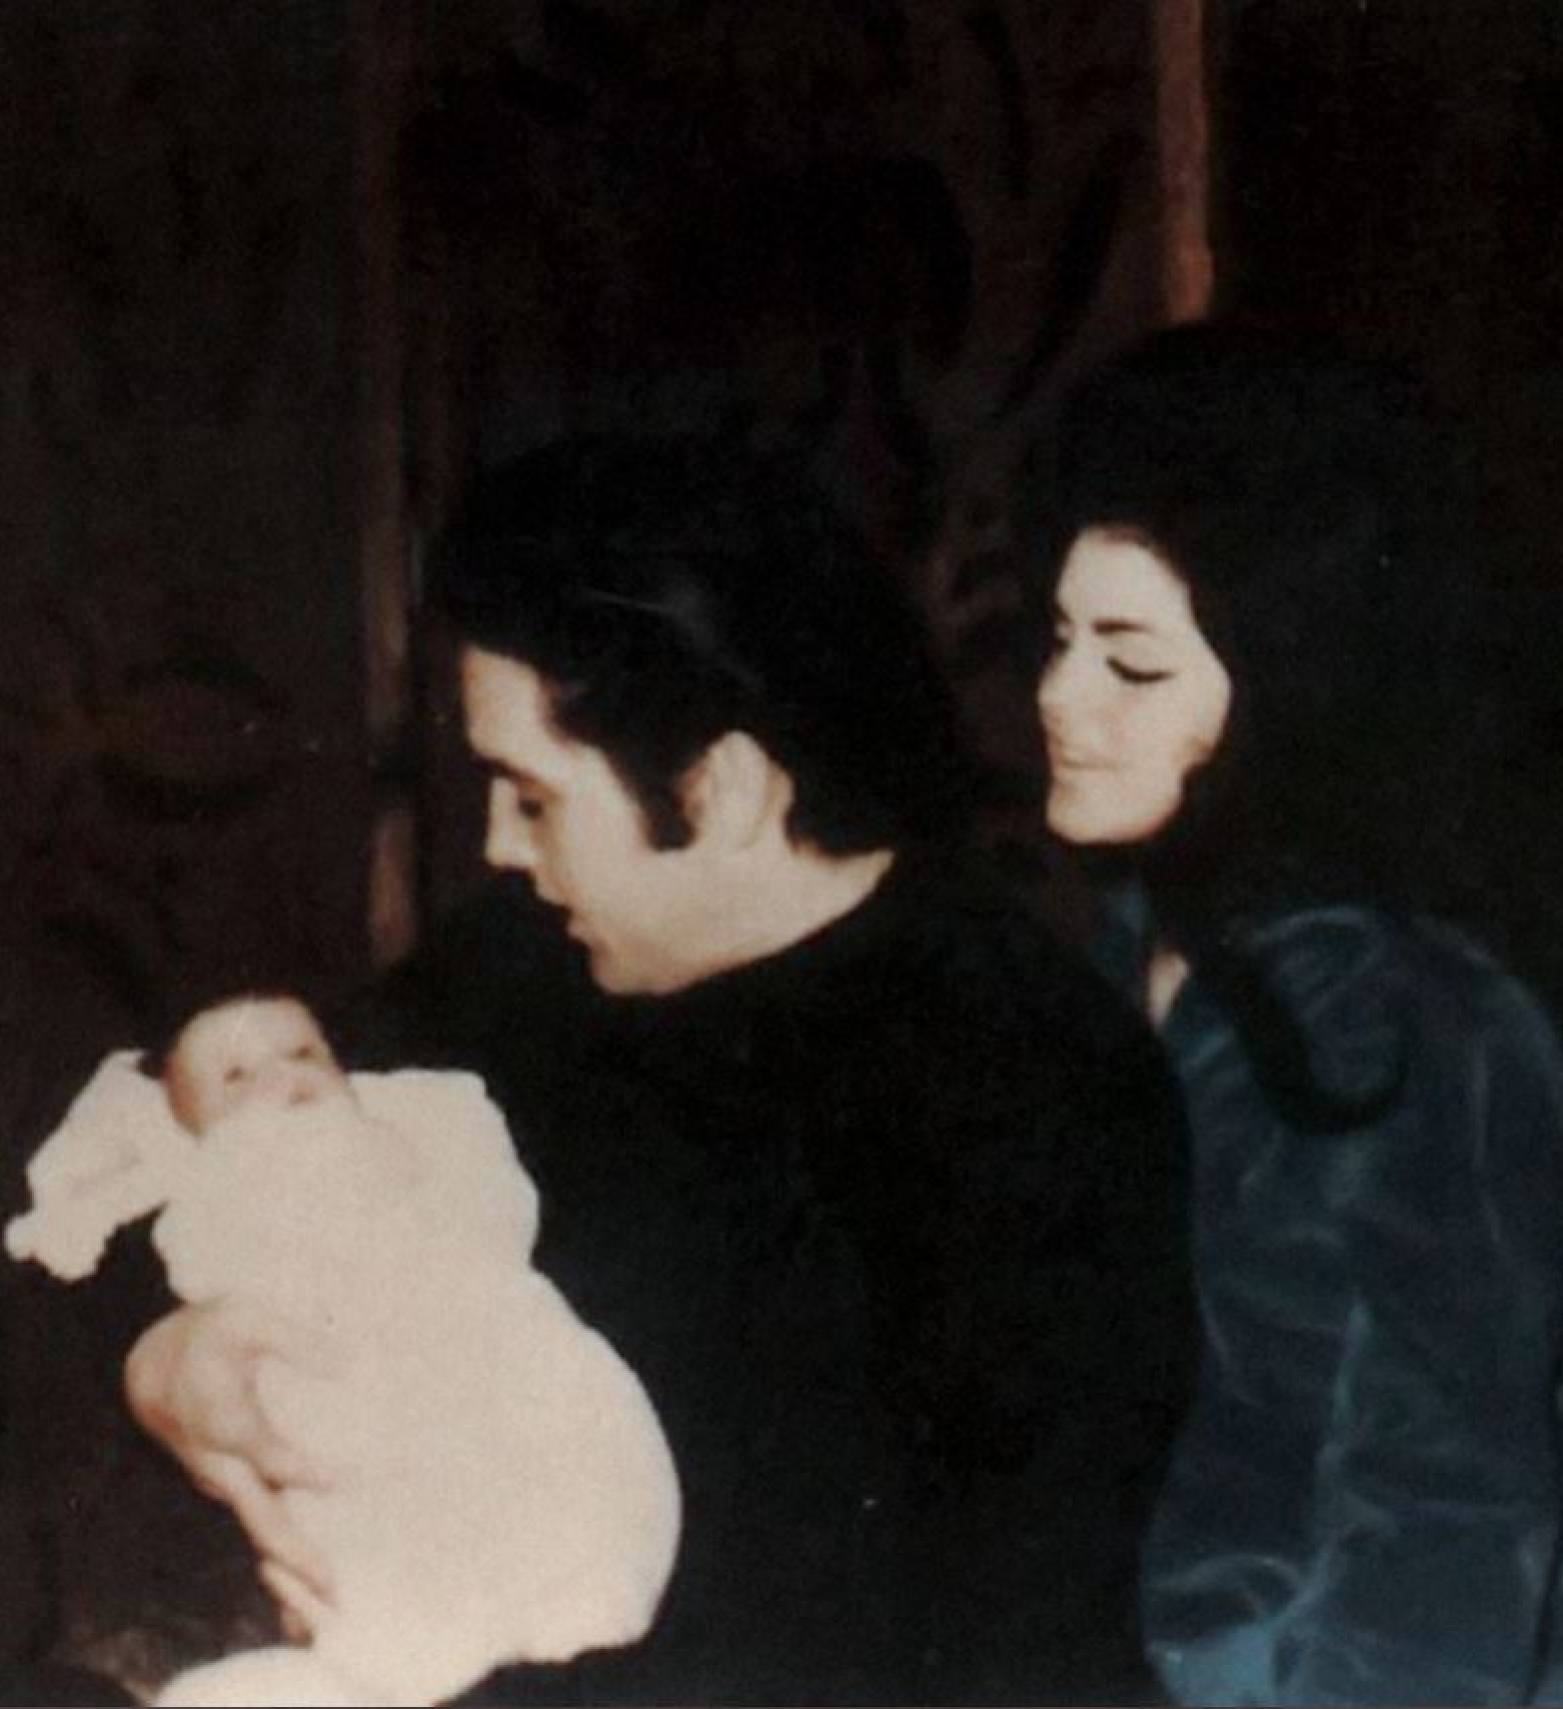 Elvis Presley with baby Lisa Marie and Priscilla at Graceland, in 1968. Photo: @presleyarchive/Twitter